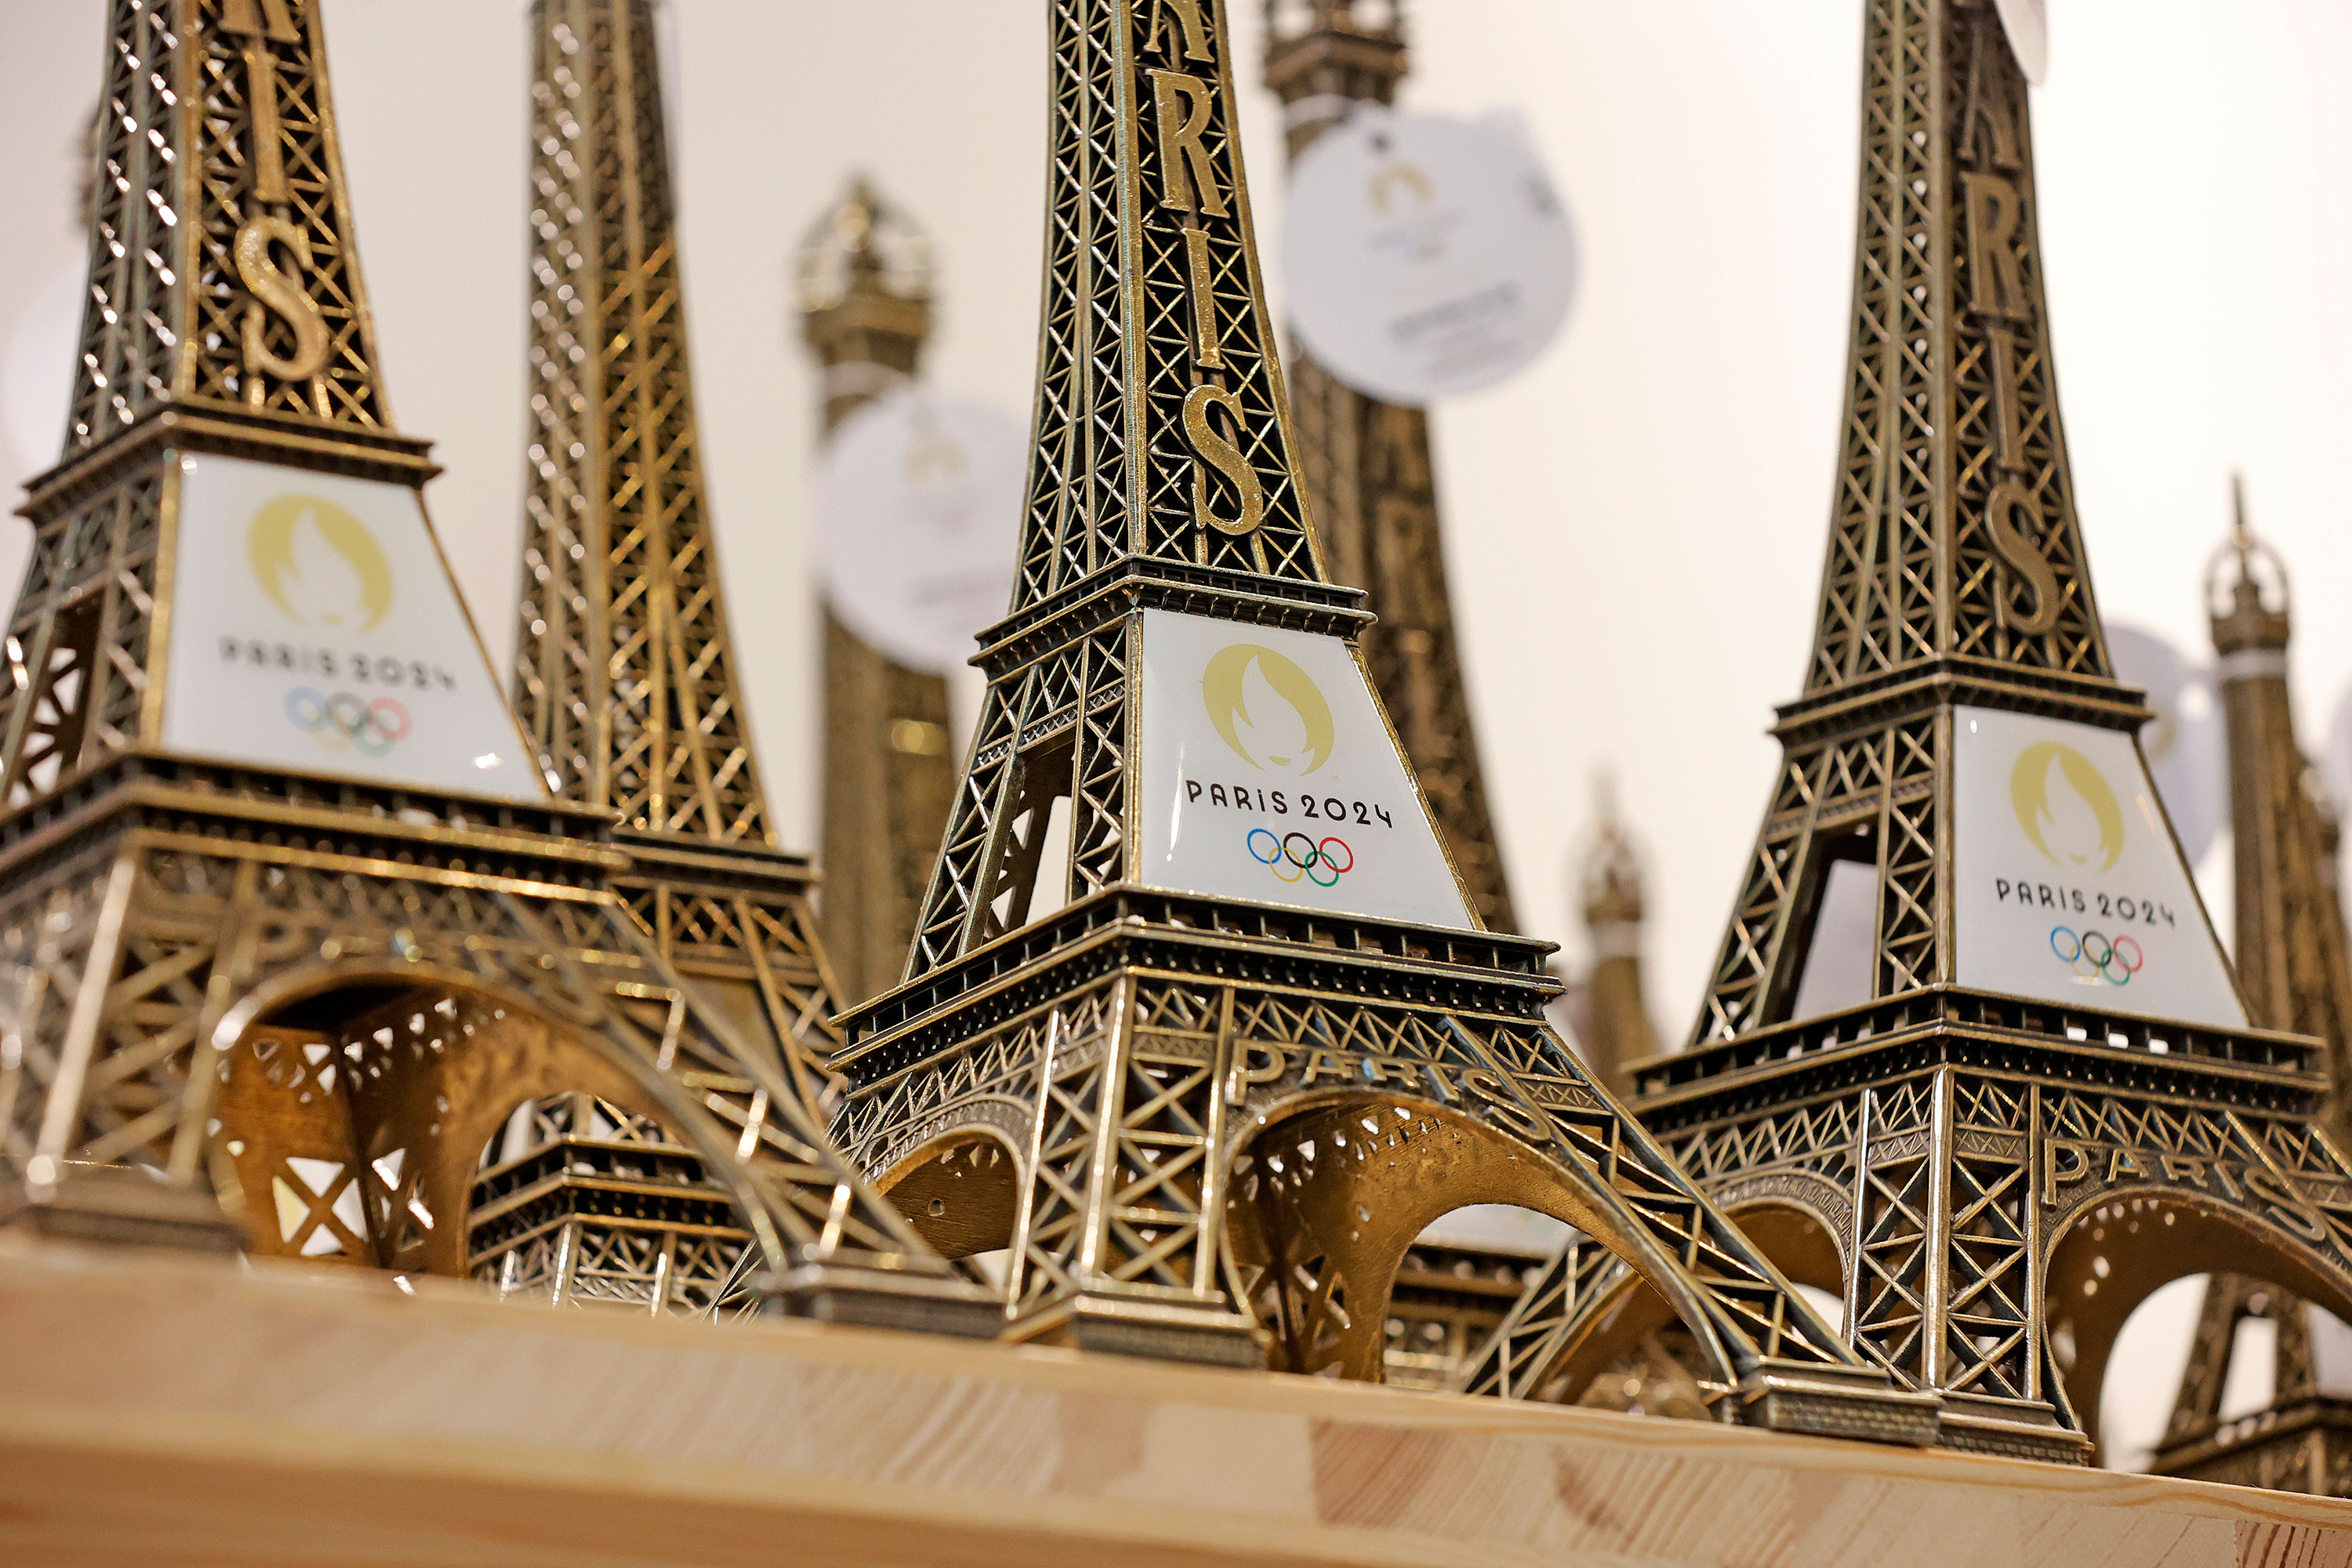 Eiffel Tower trinkets are displayed inside a store in Paris in November.